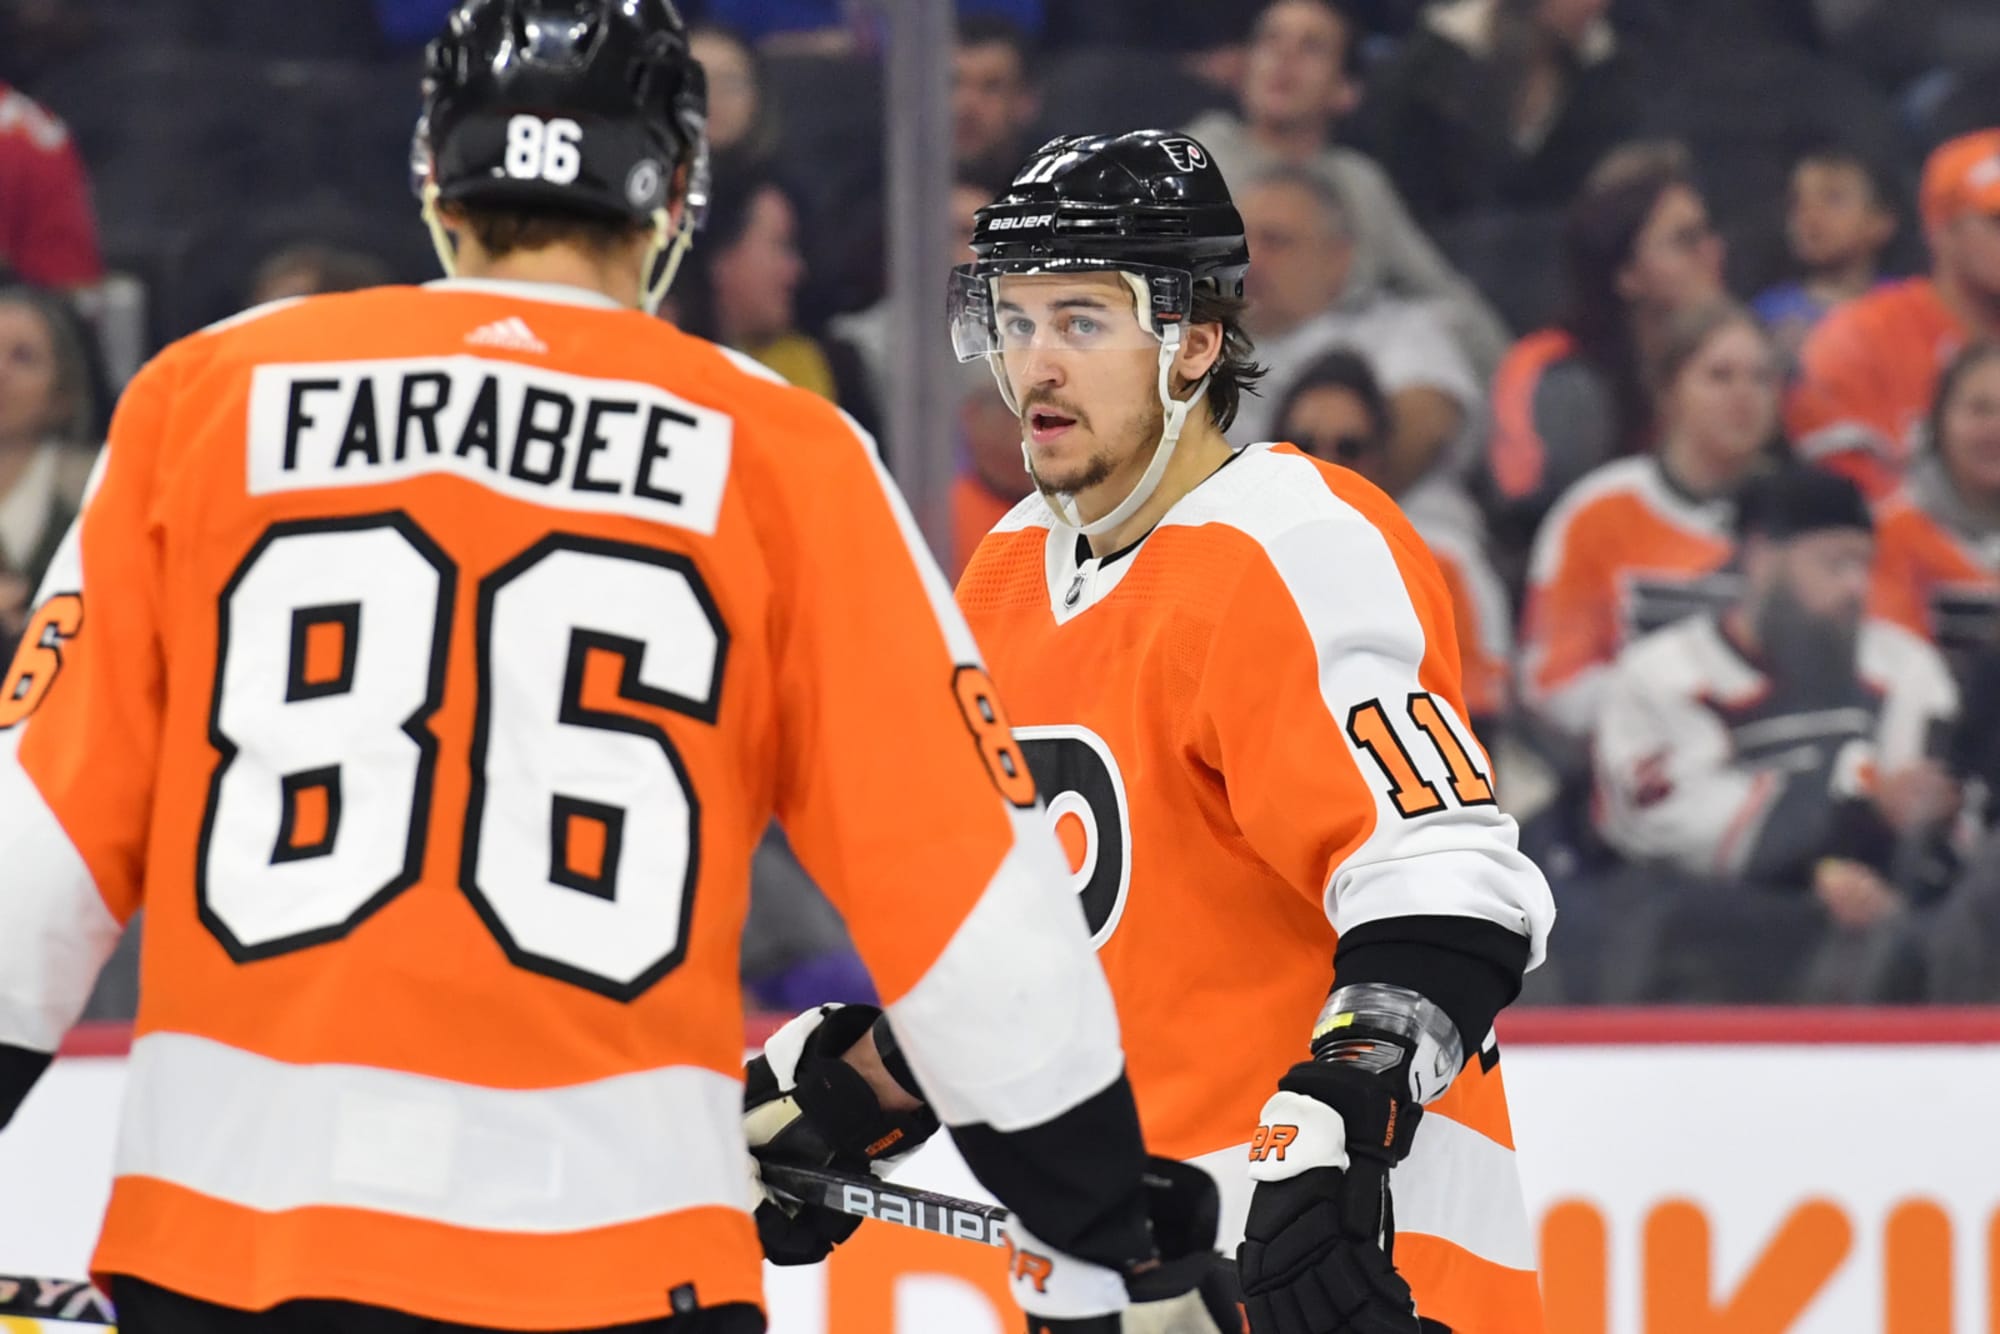 Flyers' Briere accepts challenge of an oncoming rebuild